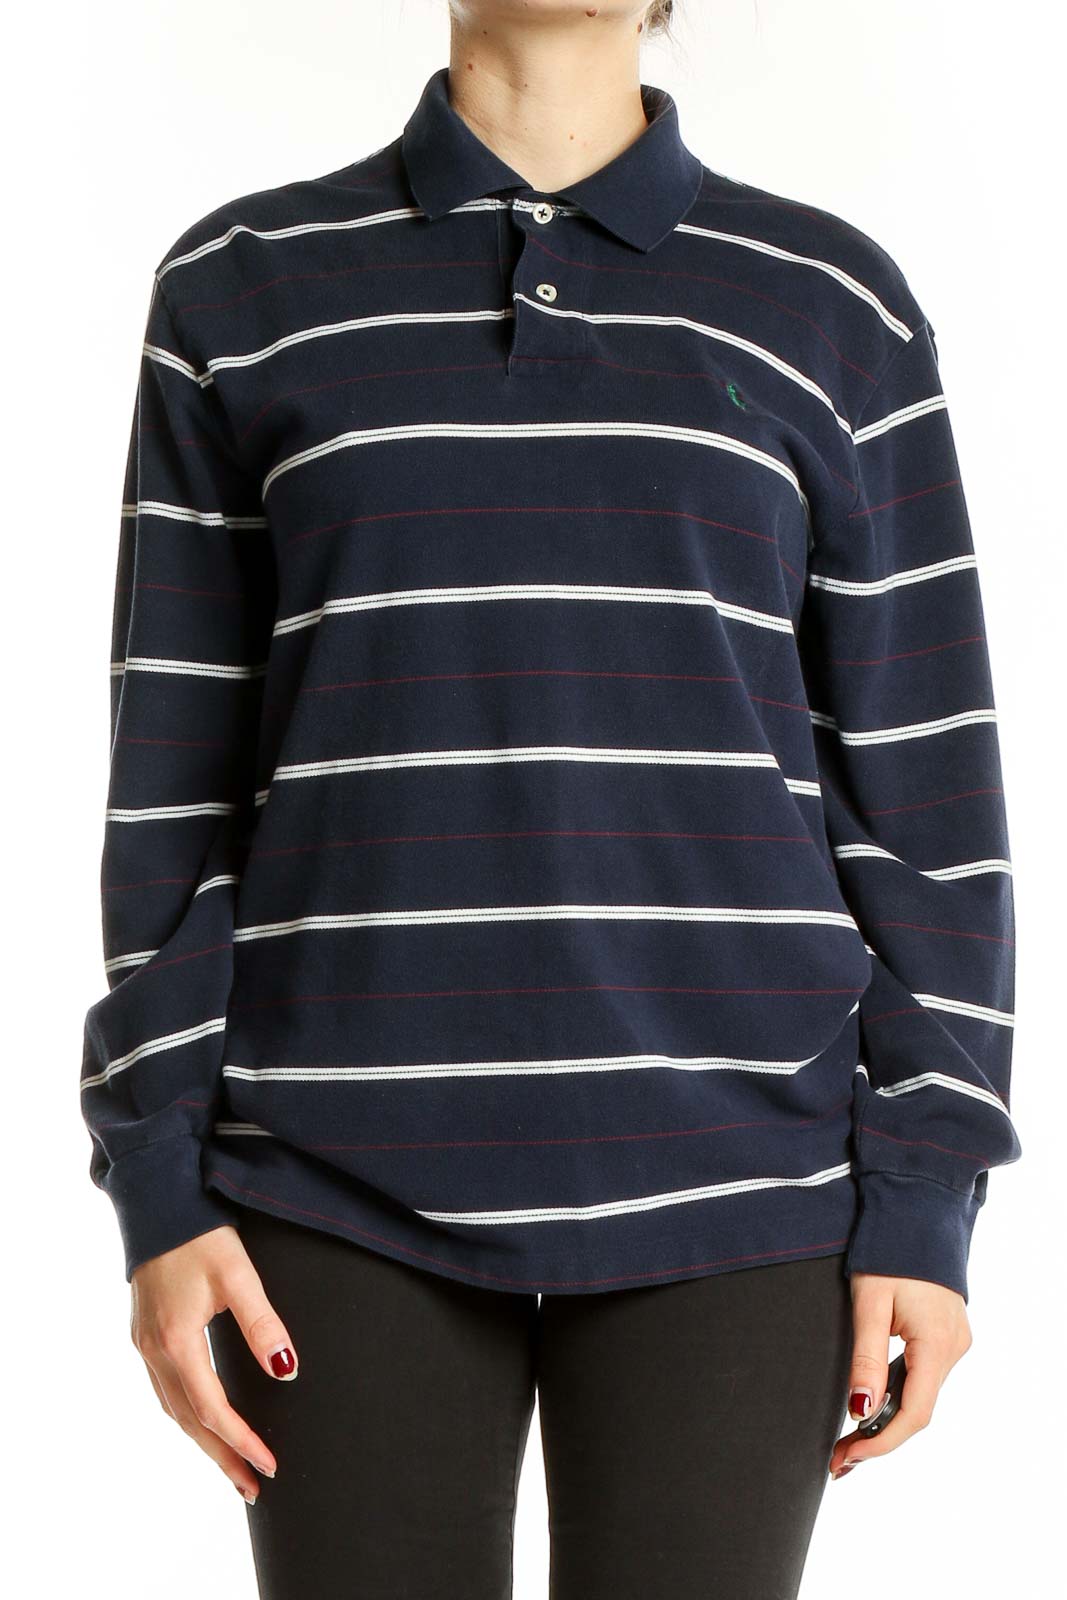 Bue Striped Polo Shirt Front